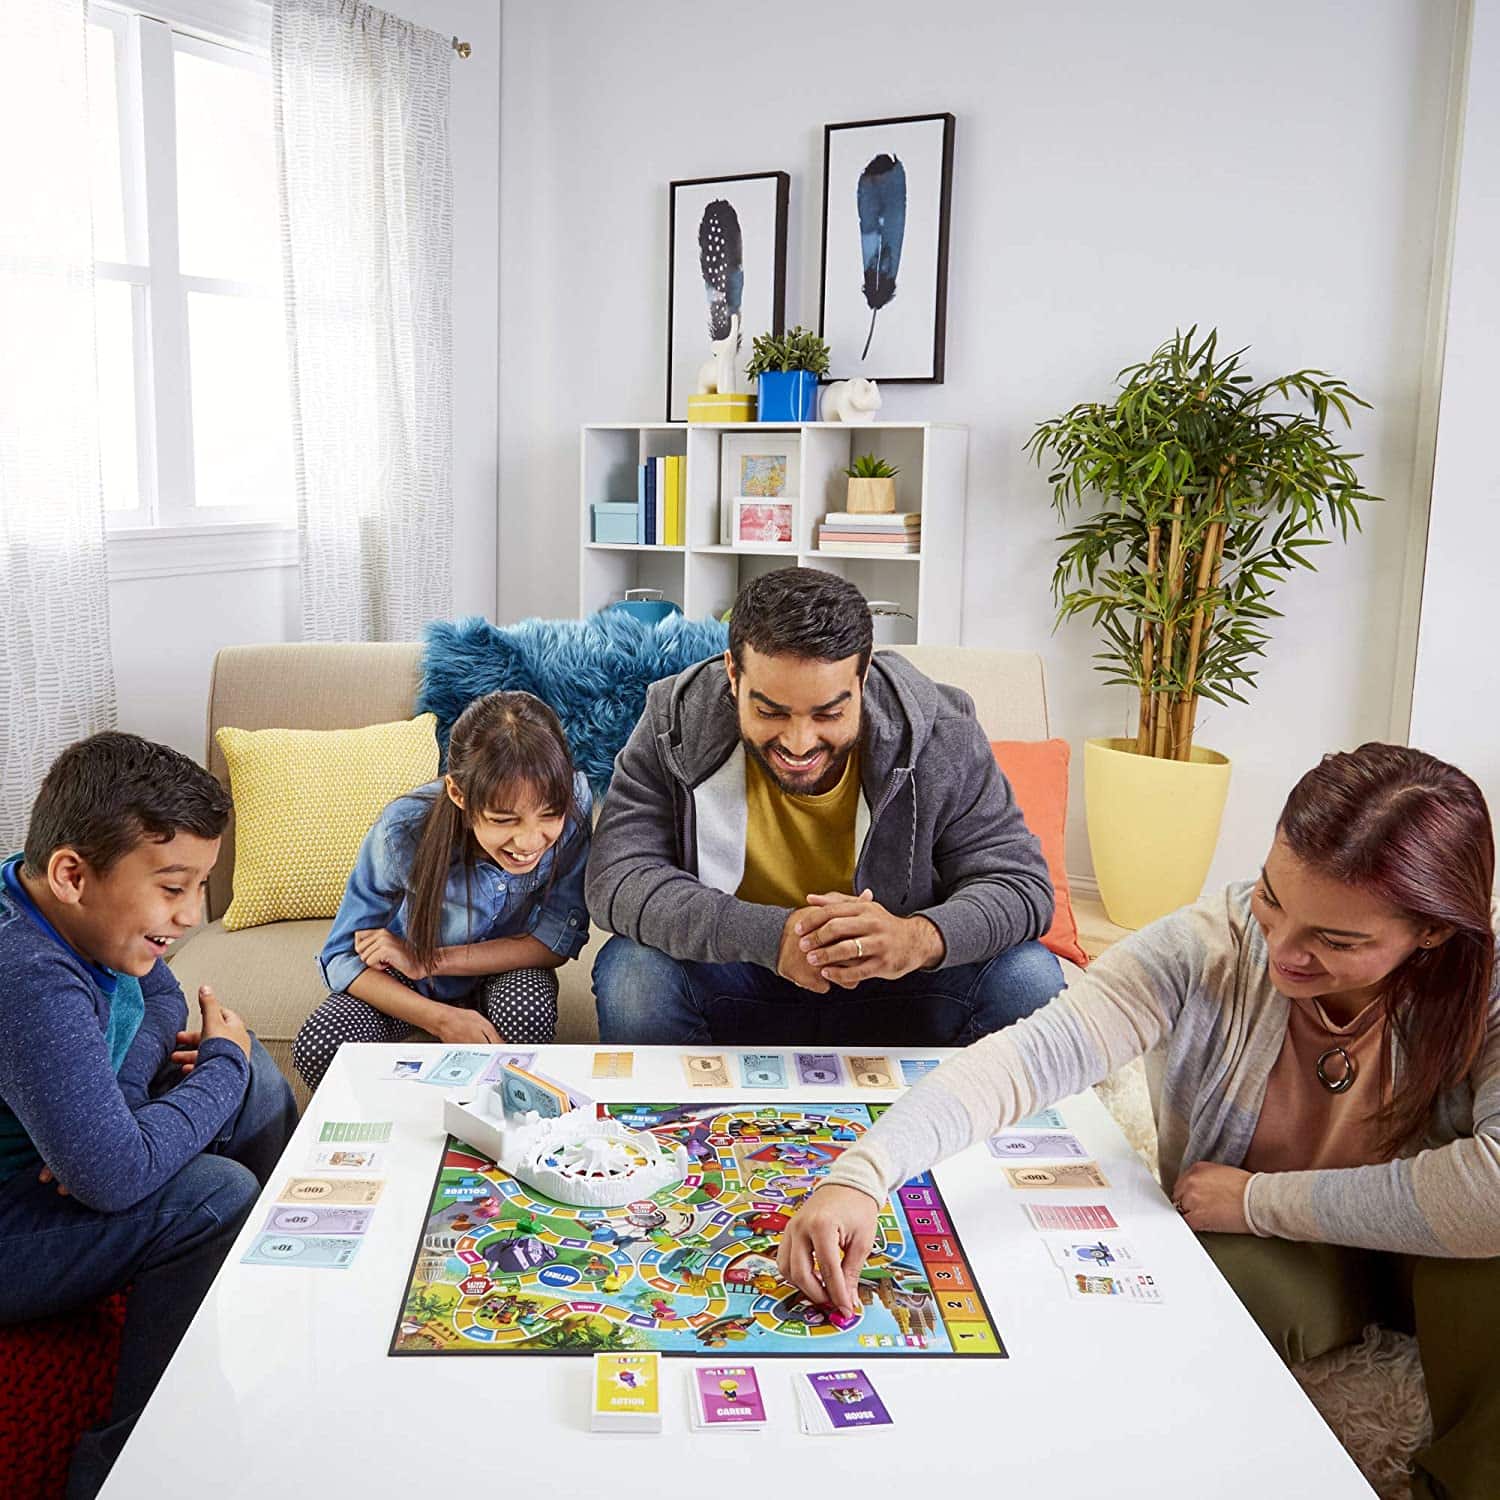 Game of Life 2021 'Your Life Your Way' Total Product Offering with game board, money, cards, and spinner, in a lifestyle photoshoot with family in their home. Made by Hasbro Gaming